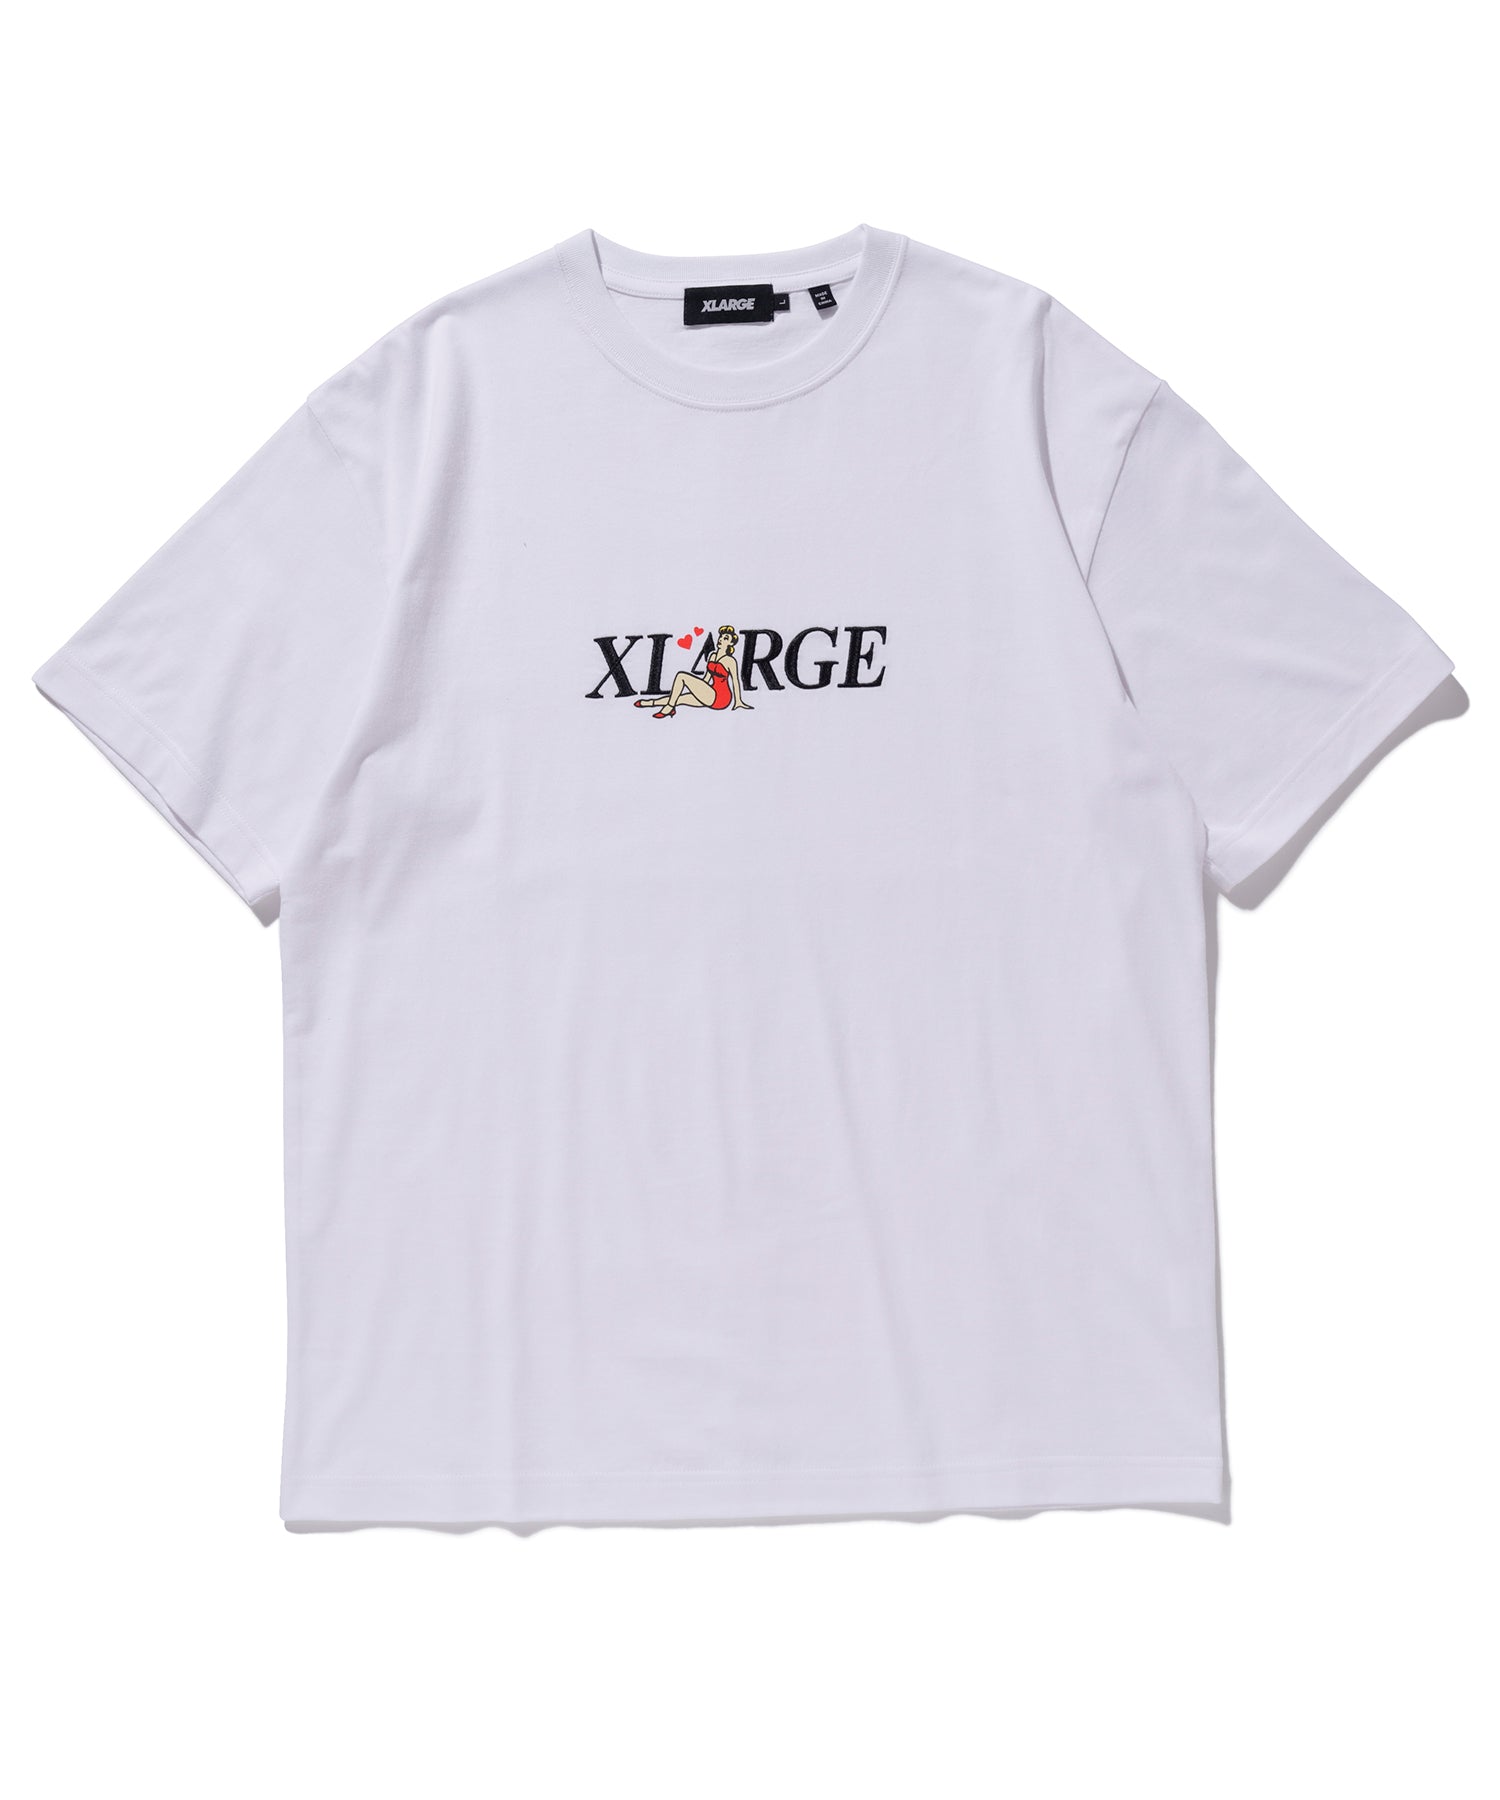 BACK IN STOCK – XLARGE